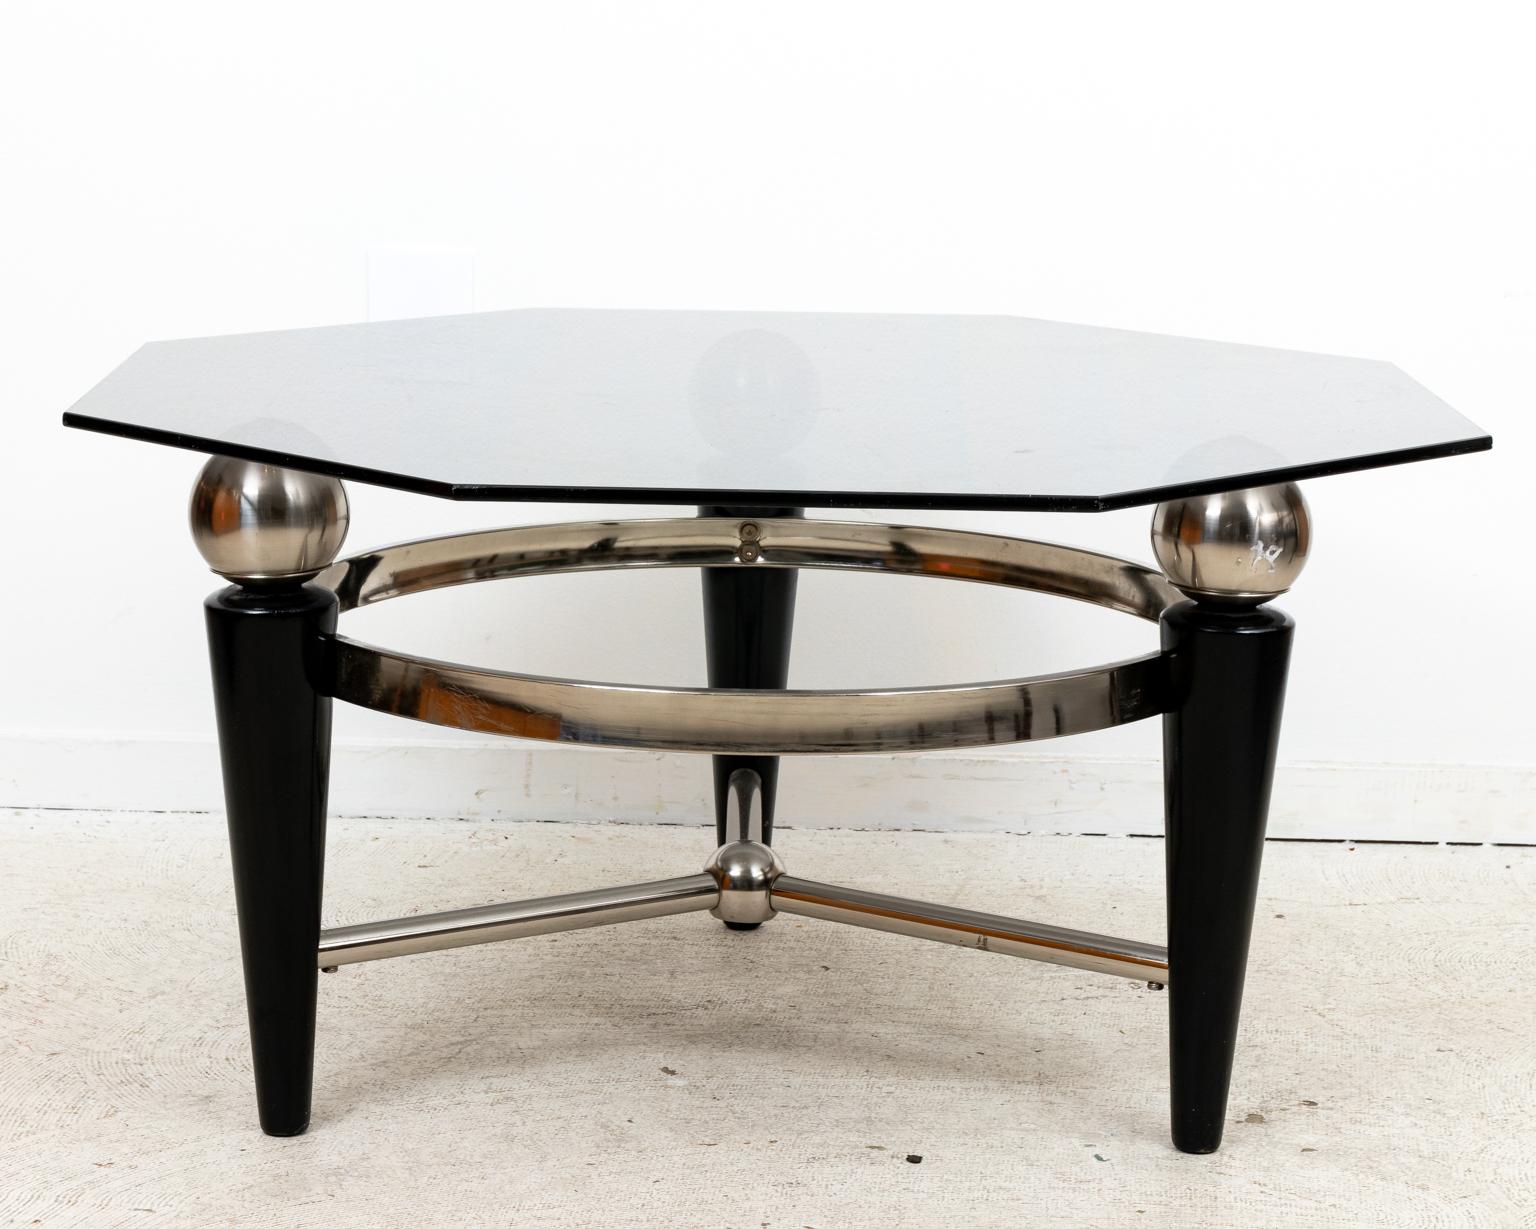 Circa mid-20th century Modernist style coffee table with Ebony and Steel base. The table features a Hexagonal smoke glass top on three steel orbs supported by tapered ebony legs with Steel ring and cross stretcher supports. Very good vintage